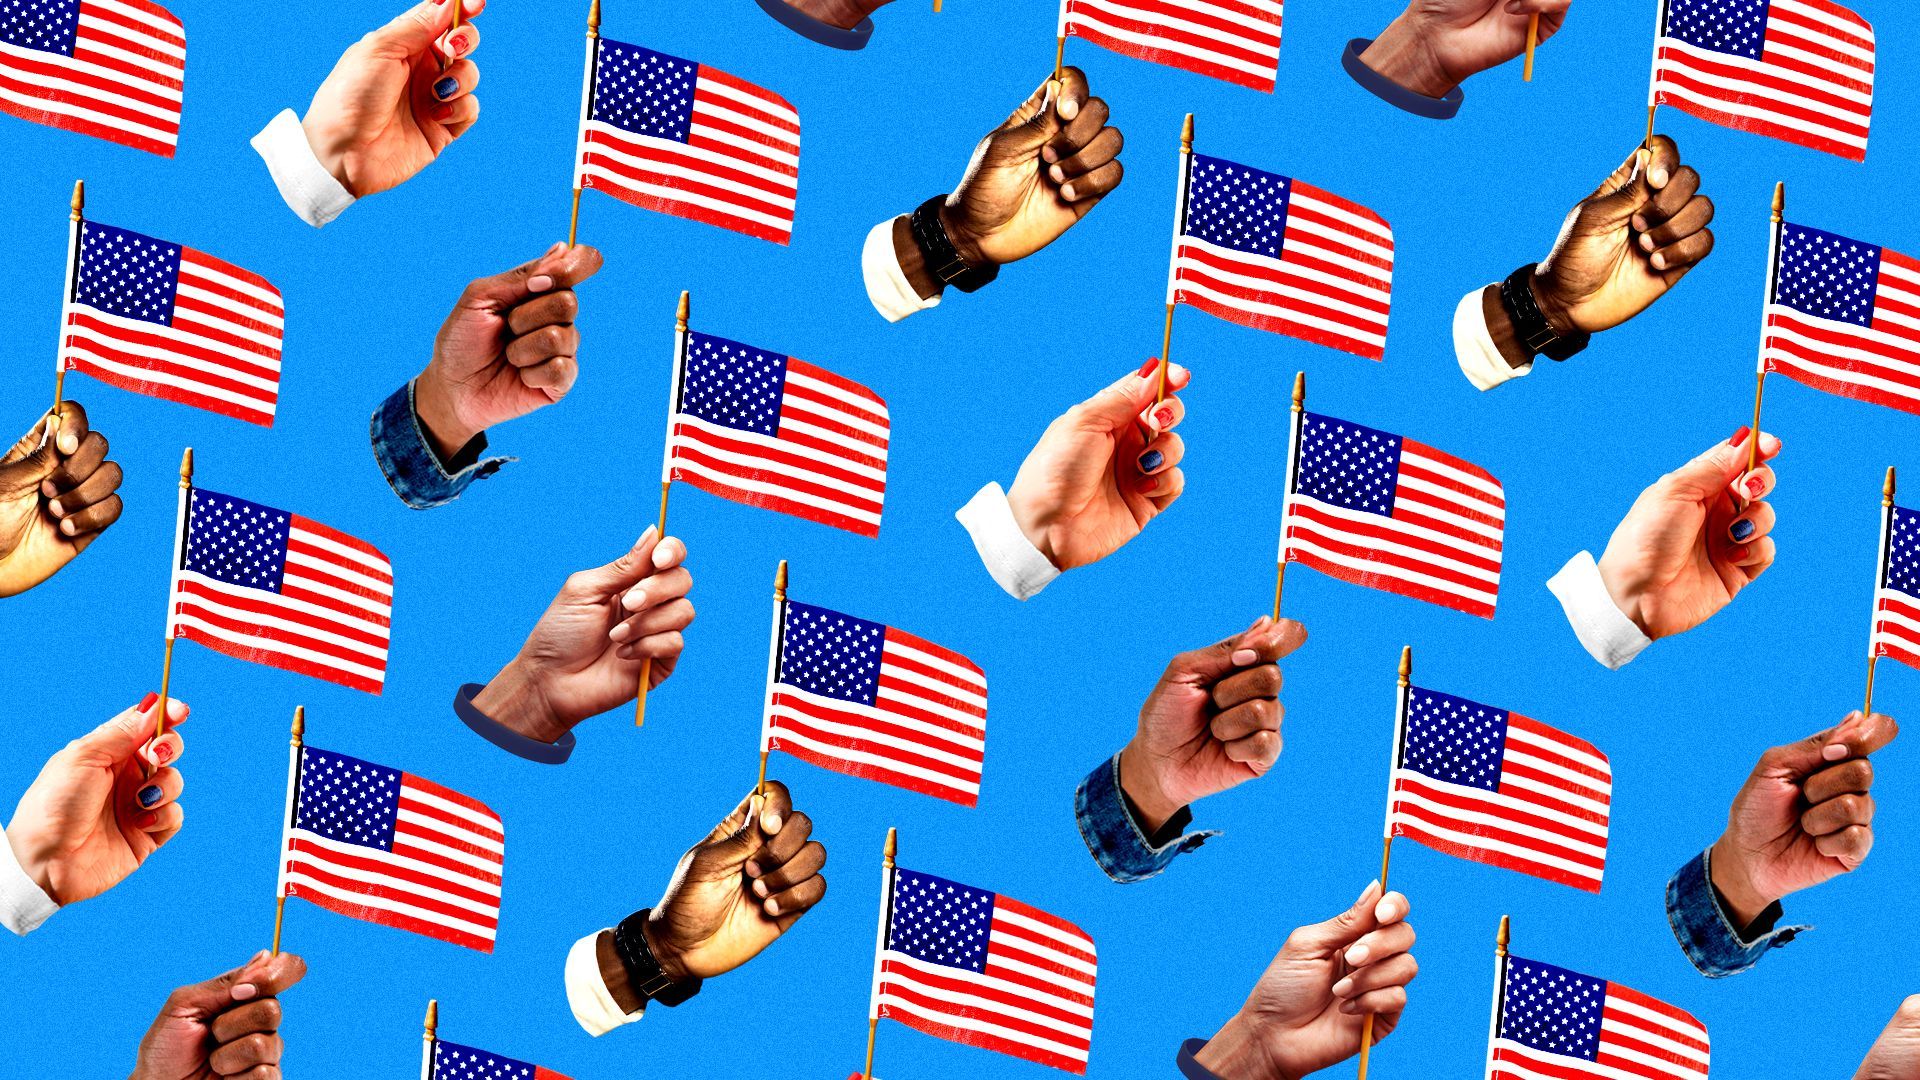 Illustration of a pattern of different hands all holding small U.S. flags